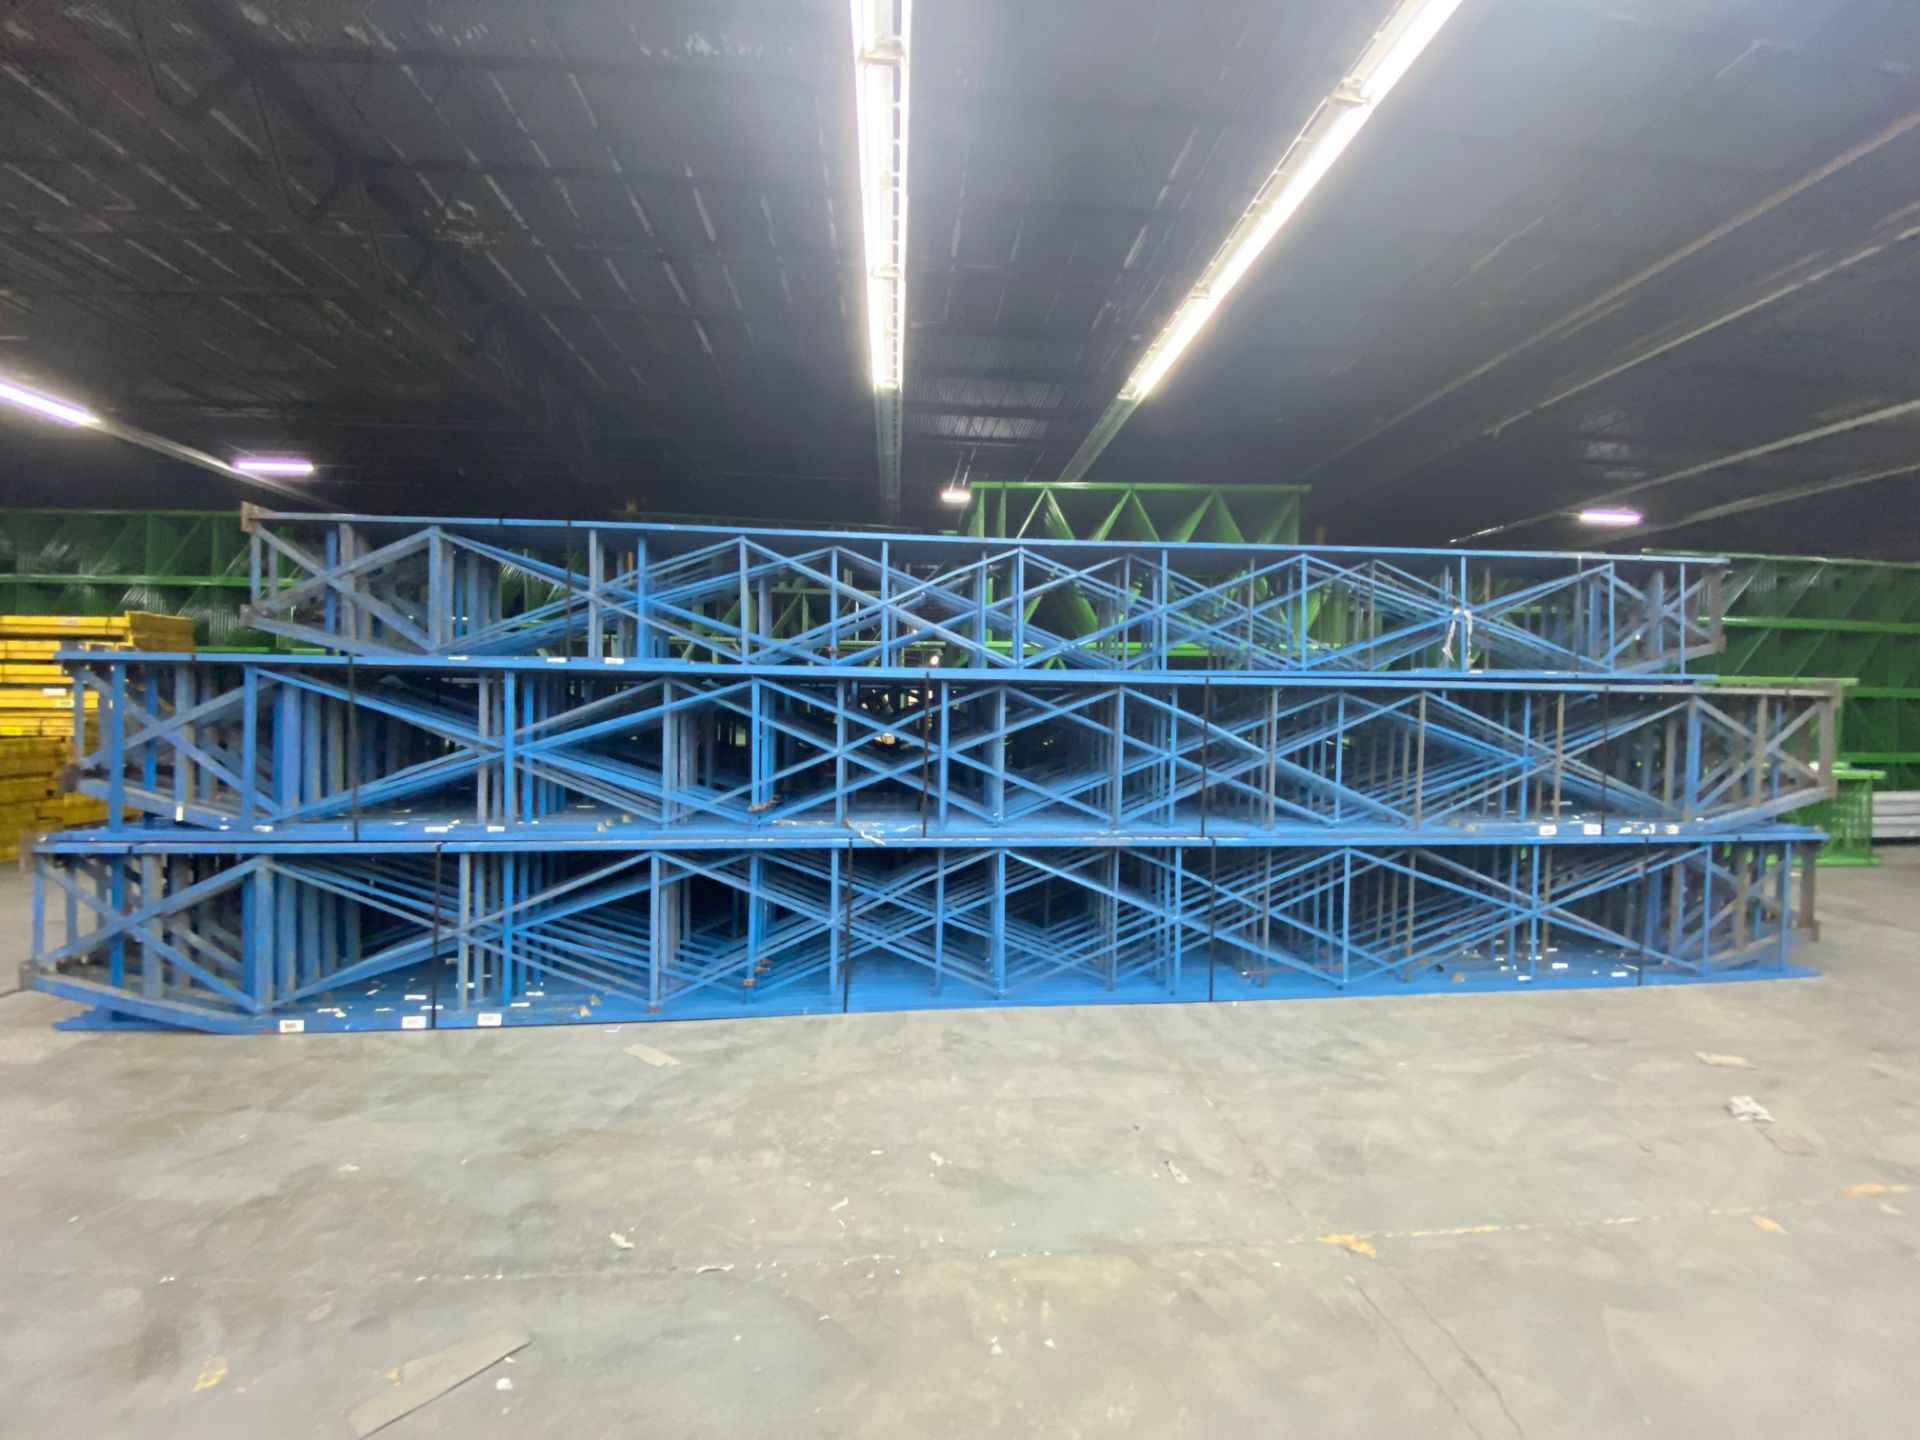 USED 60 PCS OF STRUCTURAL UPRIGHT. SIZE 30'H TO 33'H X 36"D, BLUE